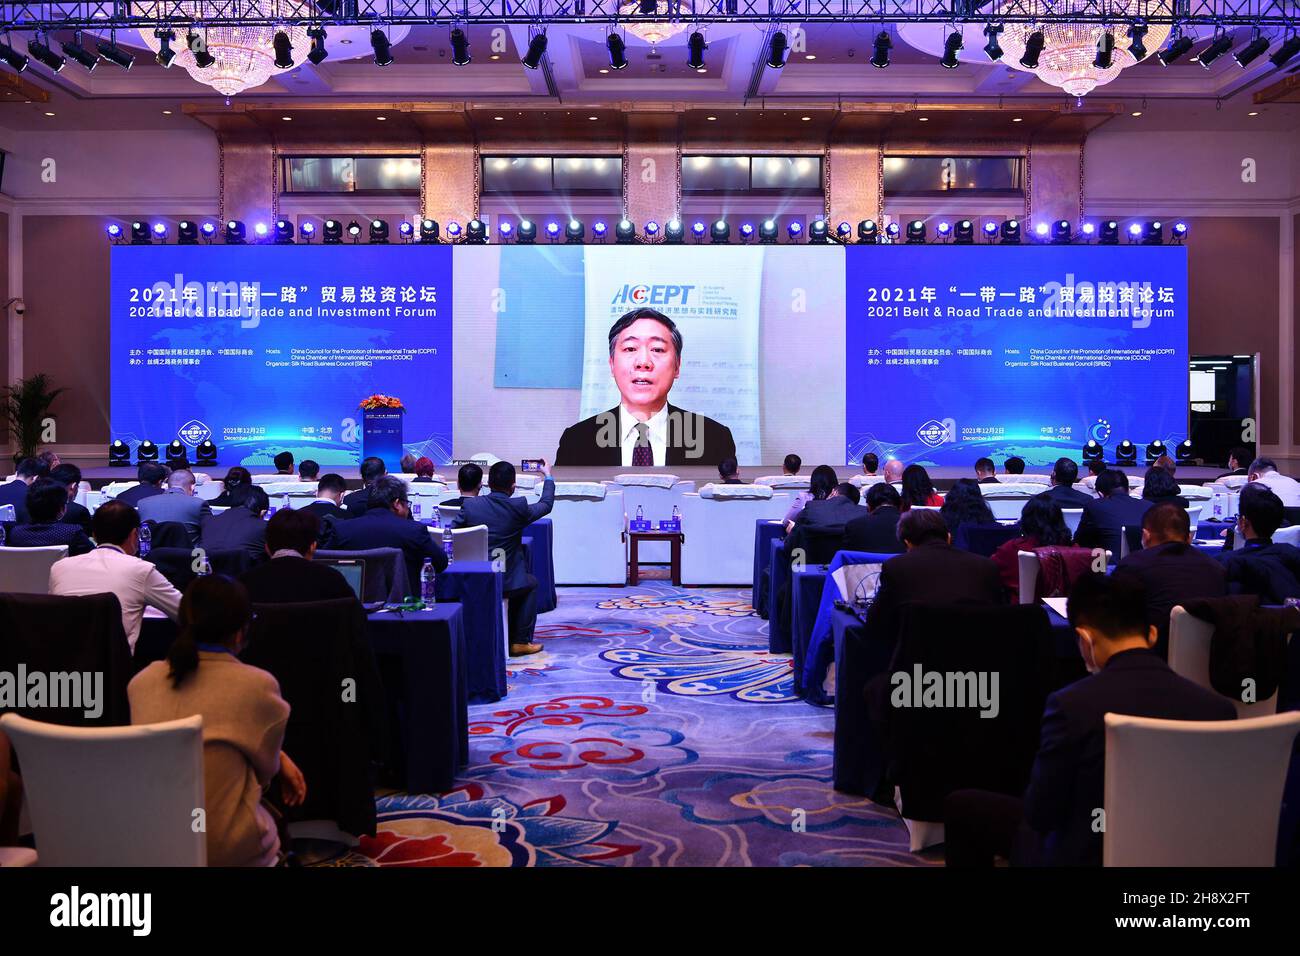 Beijing, China. 2nd Dec, 2021. Li Daokui, Director of the Academic Center for Chinese Economic Practice and Thinking (ACCEPT) at Tsinghua University addresses the 2021 Belt & Road Trade and Investment Forum via video link in Beijing, capital of China, Dec. 2, 2021. Credit: Li Xin/Xinhua/Alamy Live News Stock Photo